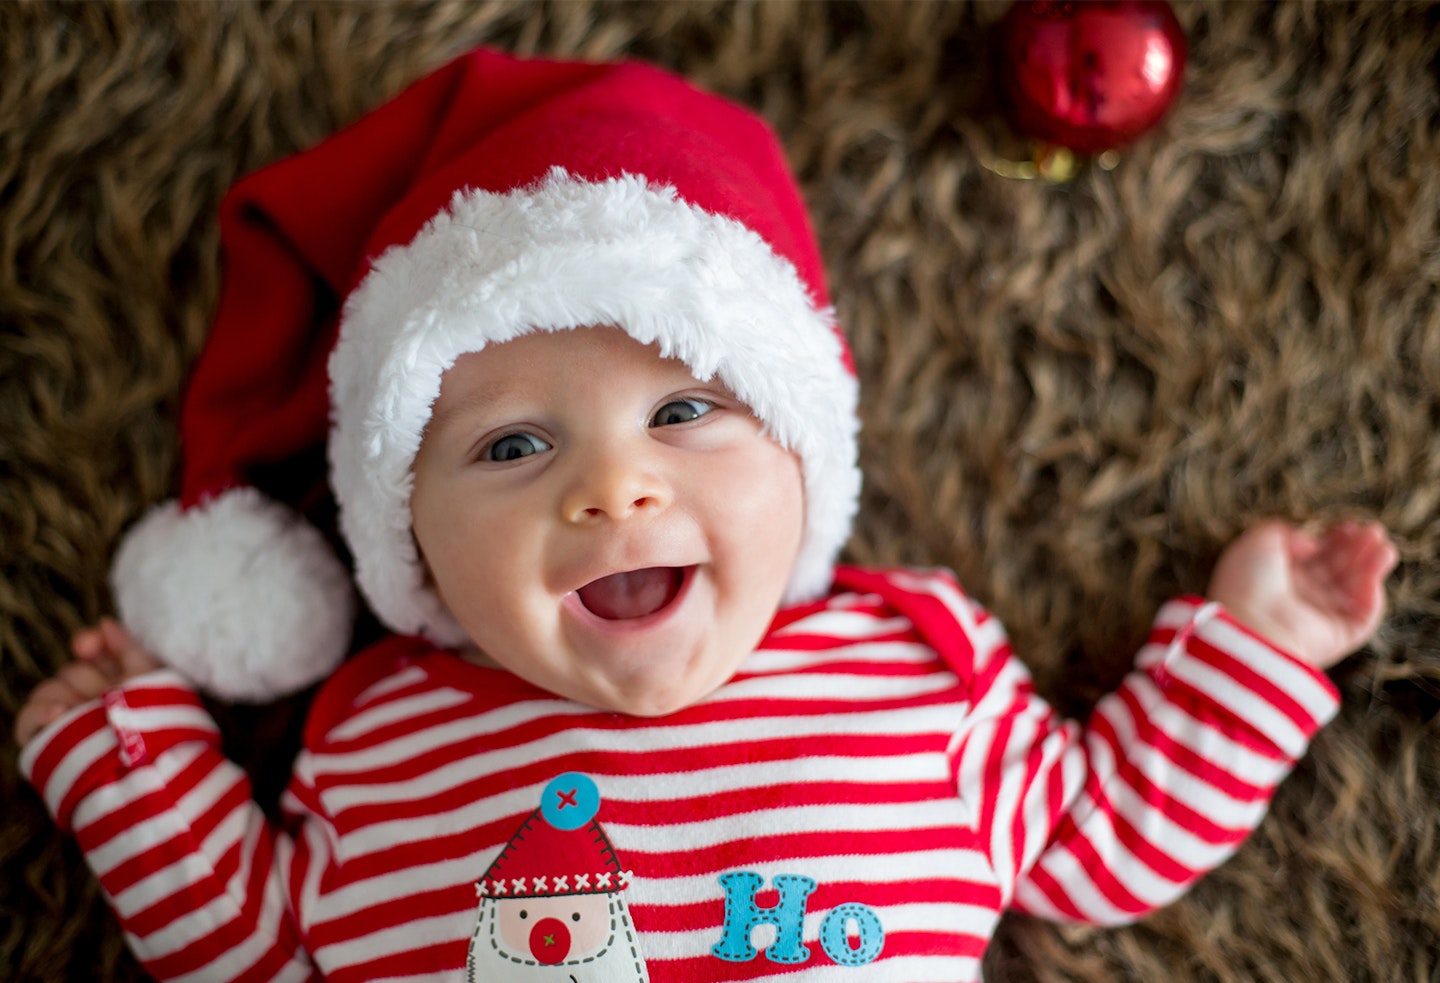 Christmas gift ideas for babies